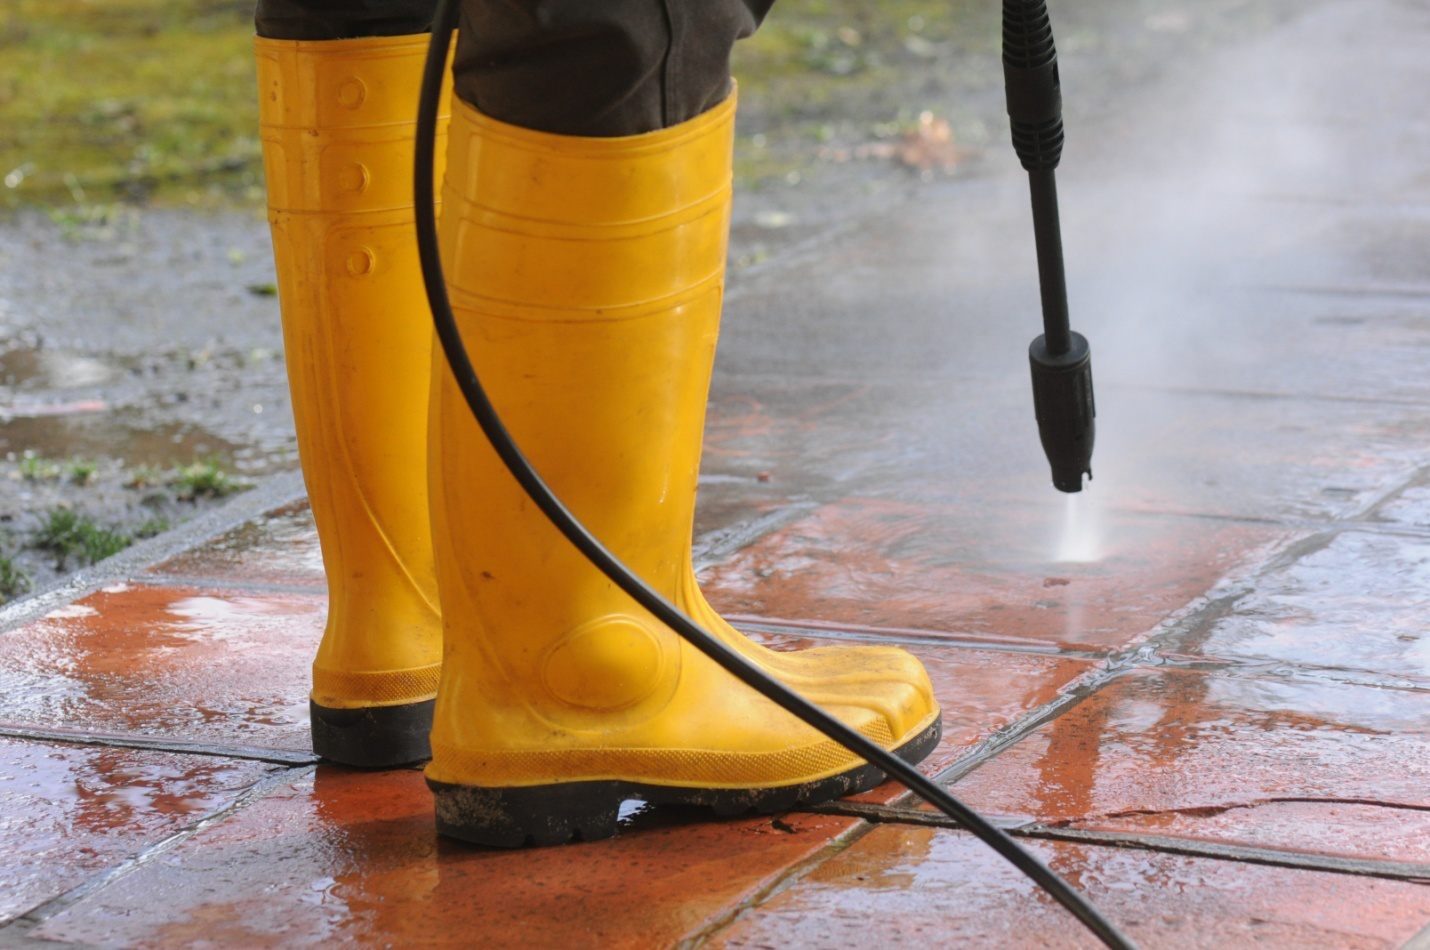 A person wearing yellow boots cleaning a home's exterior